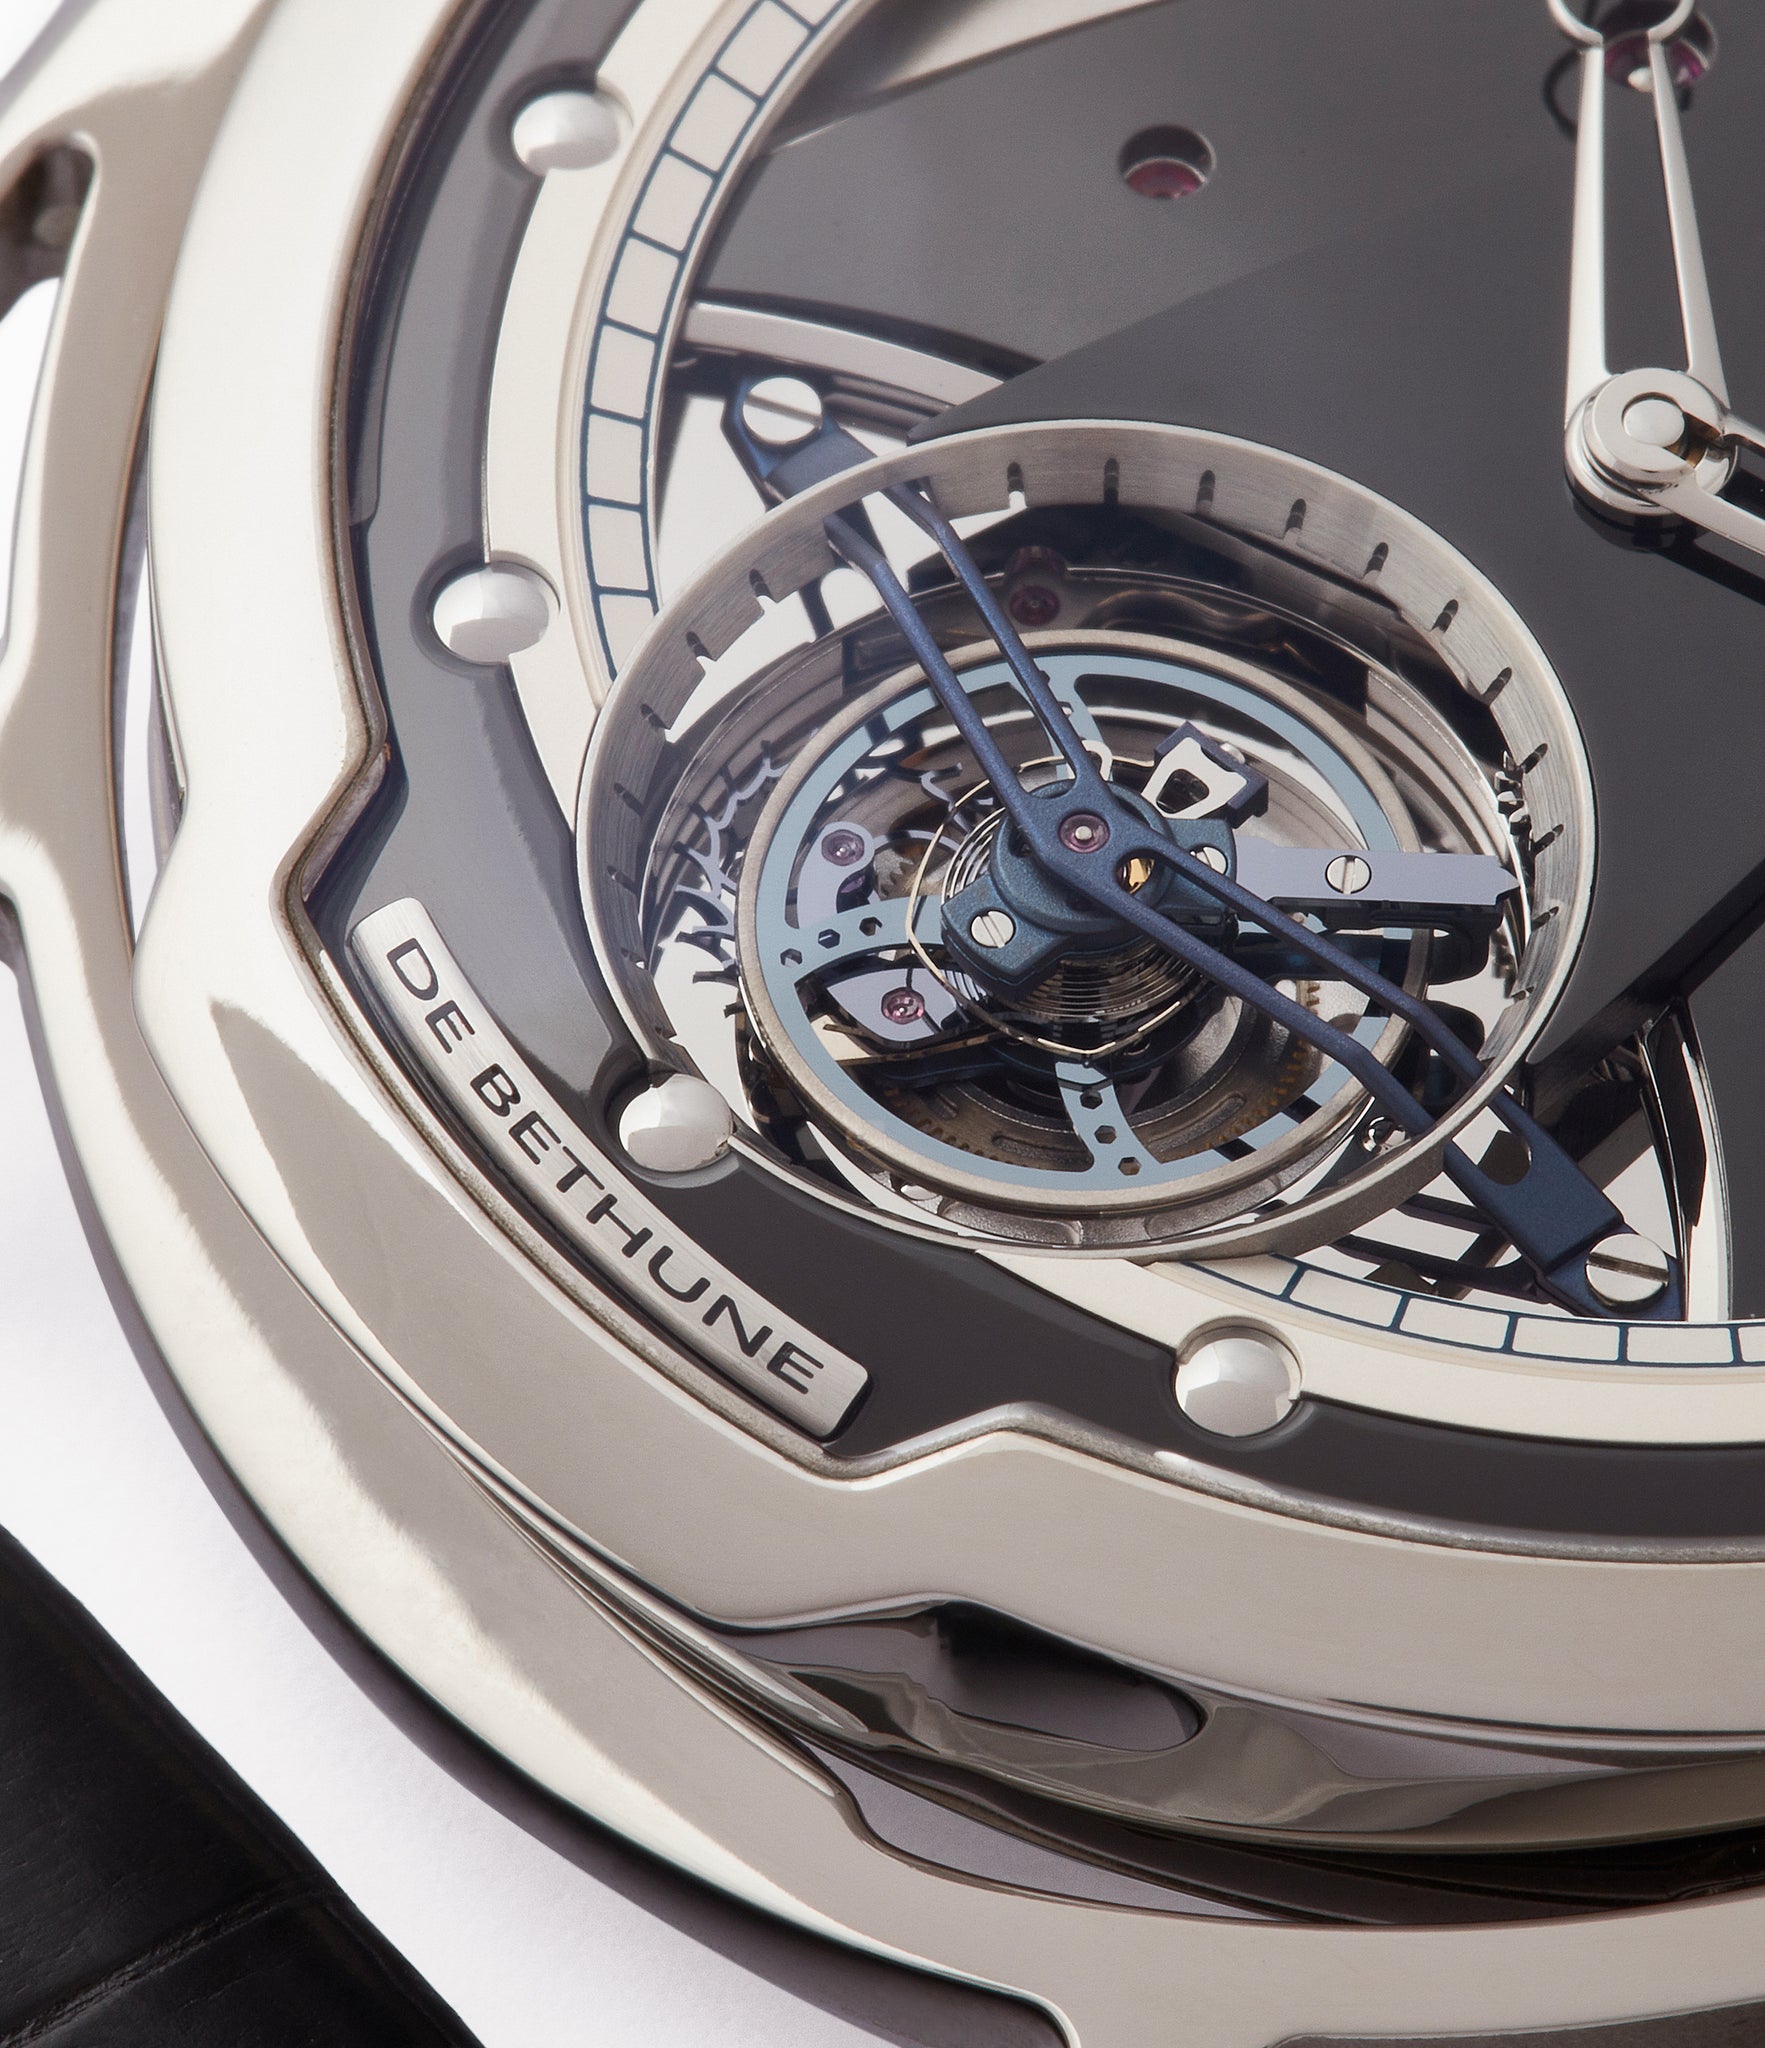 tourbillon De Bethune DB28T titanium time-only watch from independent watchmaker for sale online at A Collected Man London UK specialist of rare watches